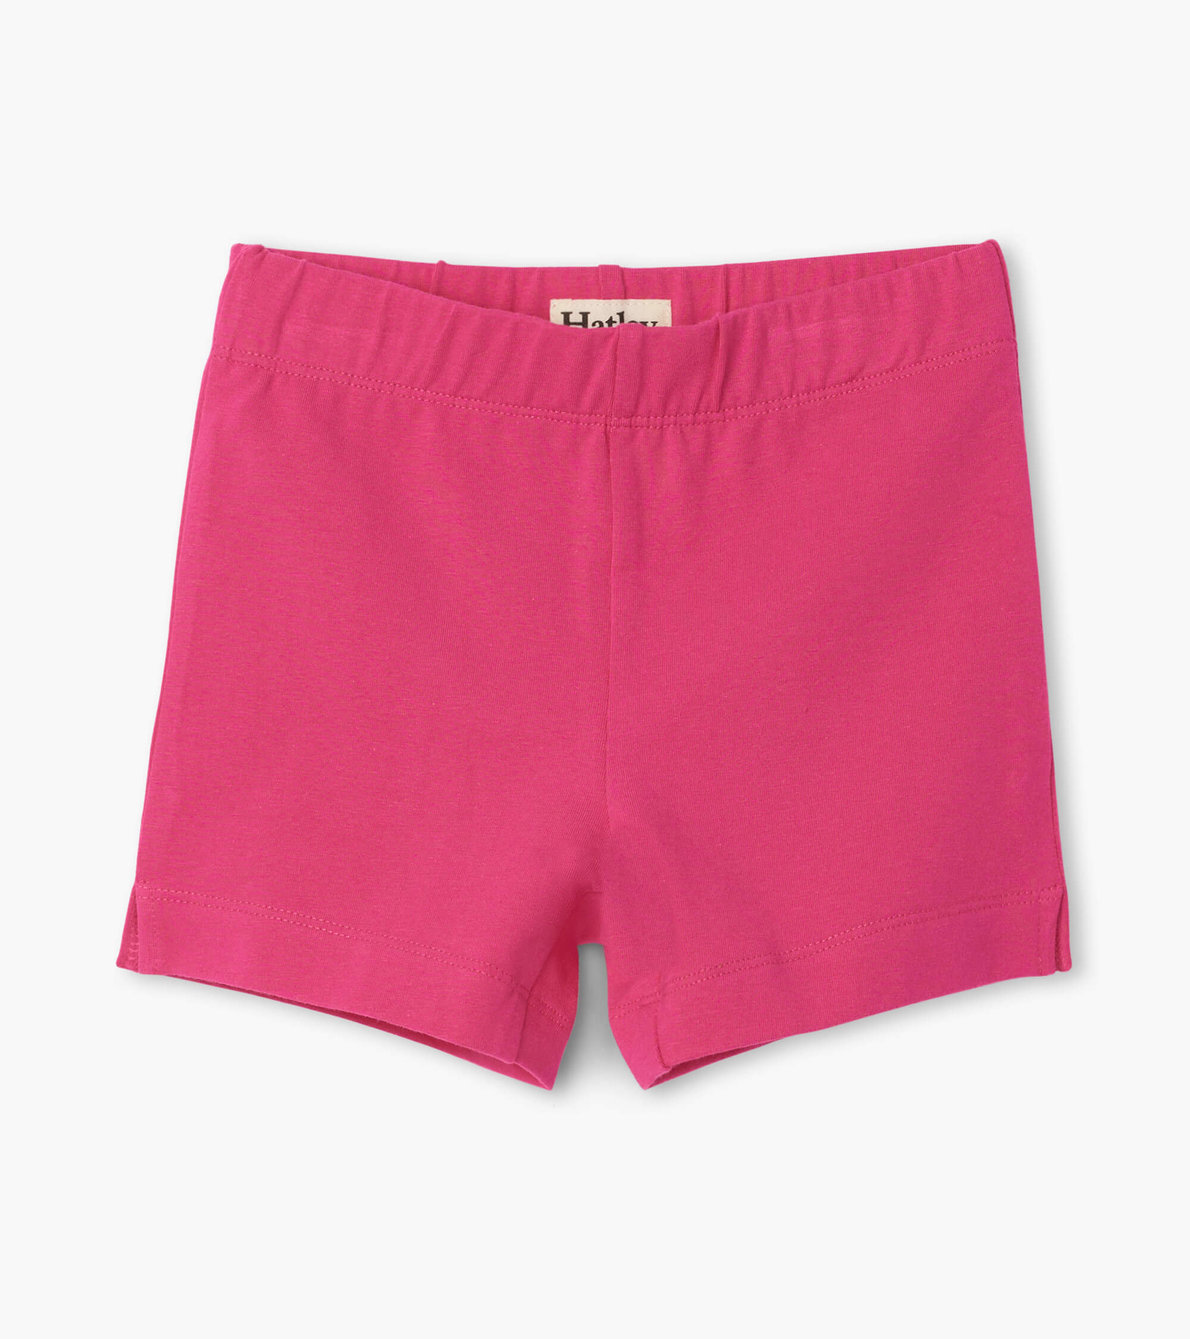 View larger image of Fuchsia Bicycle Shorts